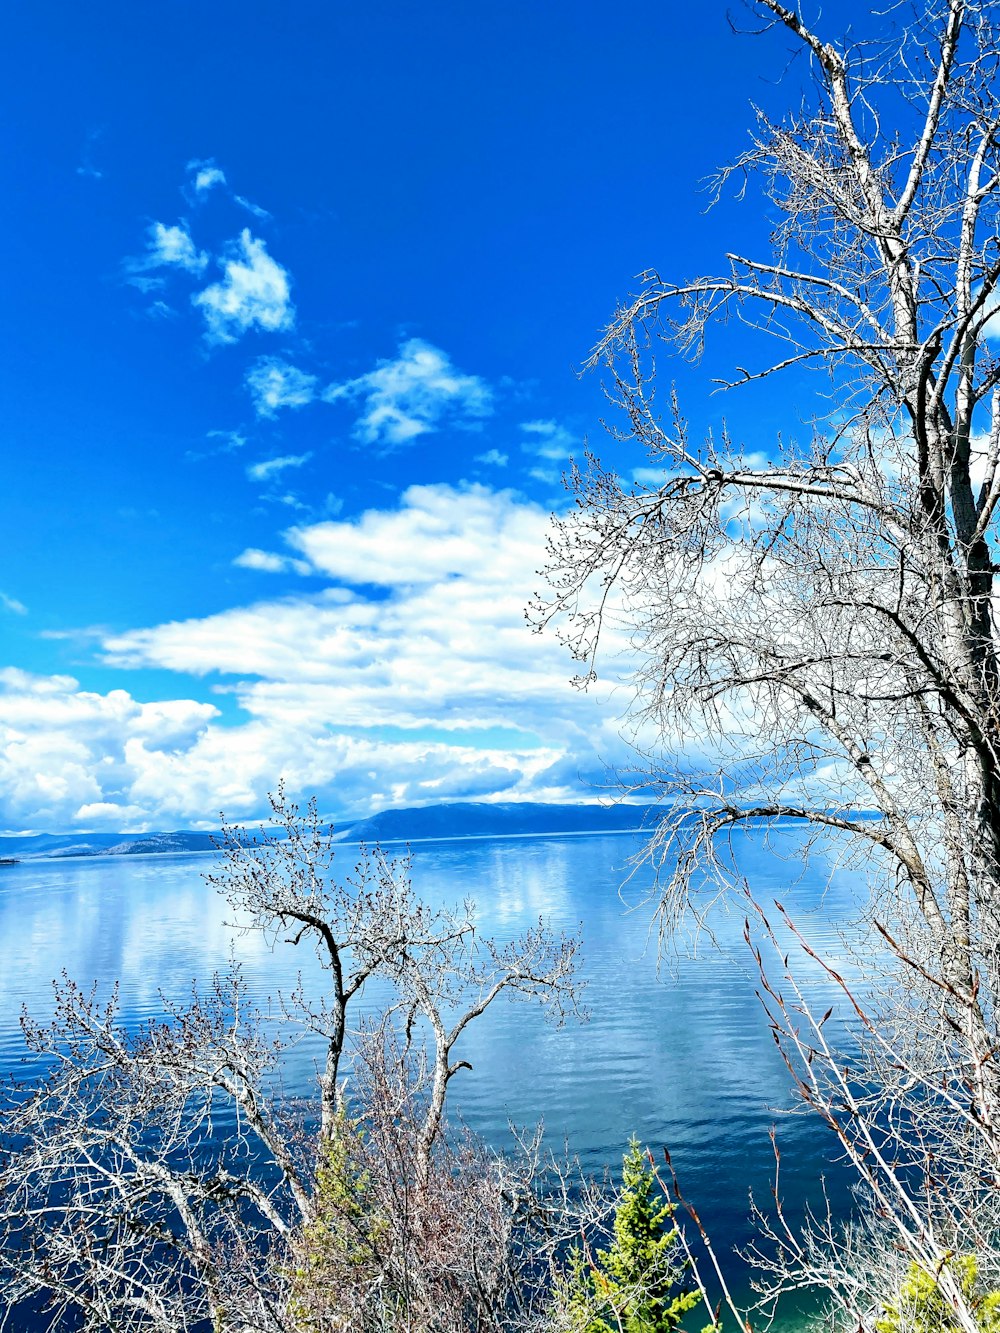 leafless tree on body of water under blue sky during daytime